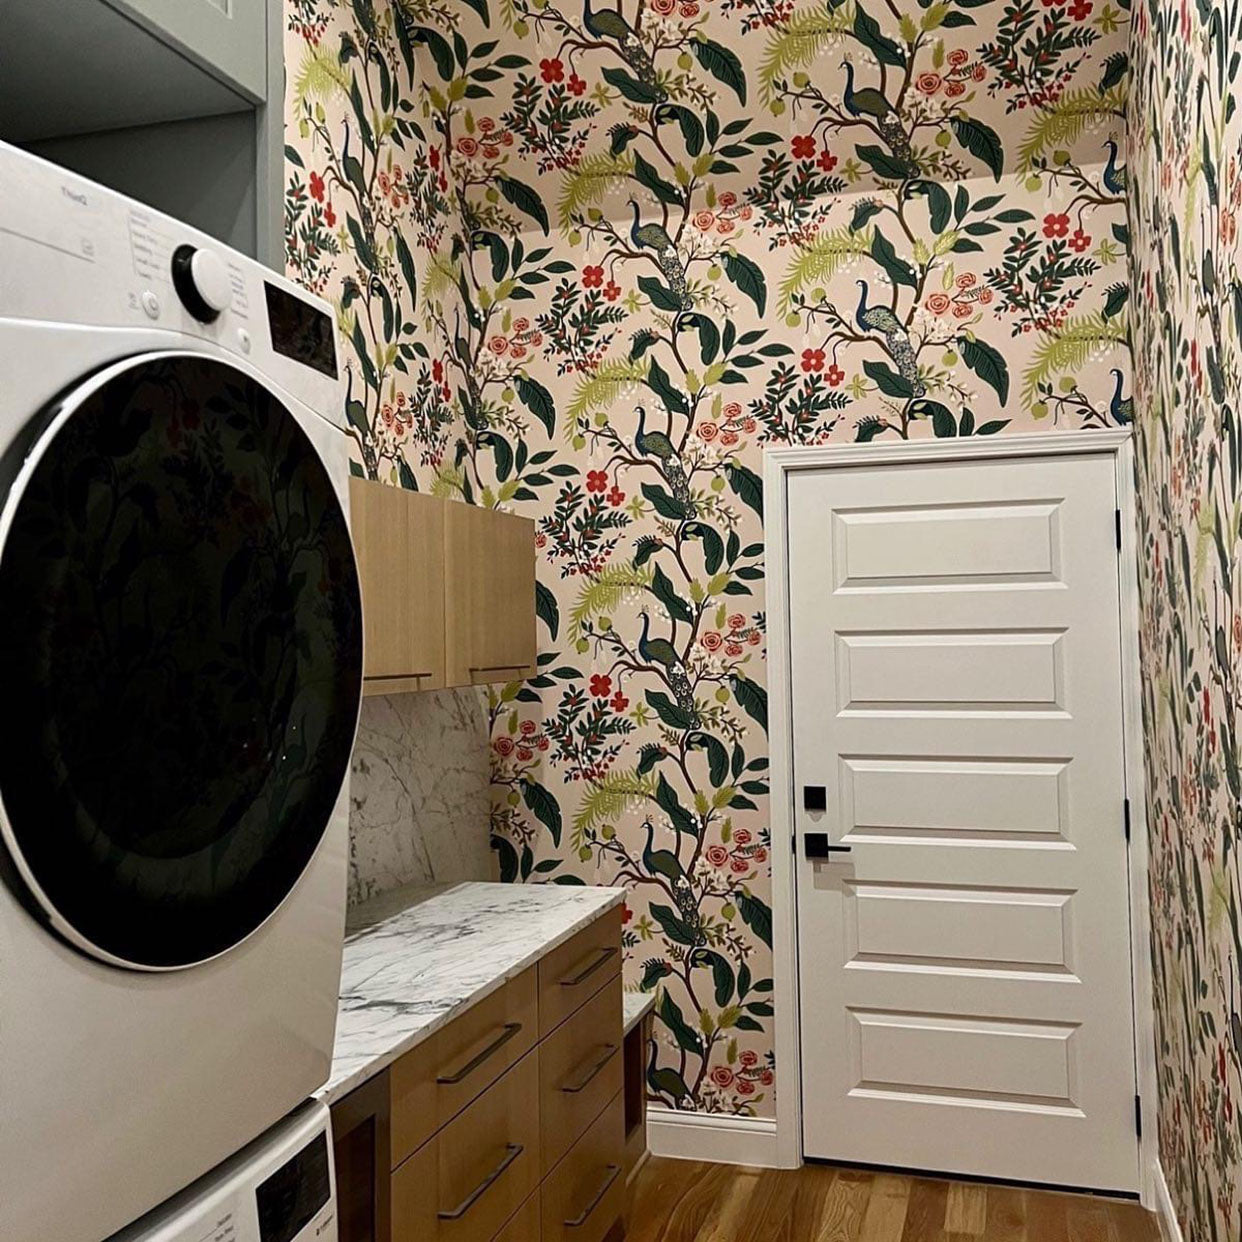 Wall paper in a laundry room